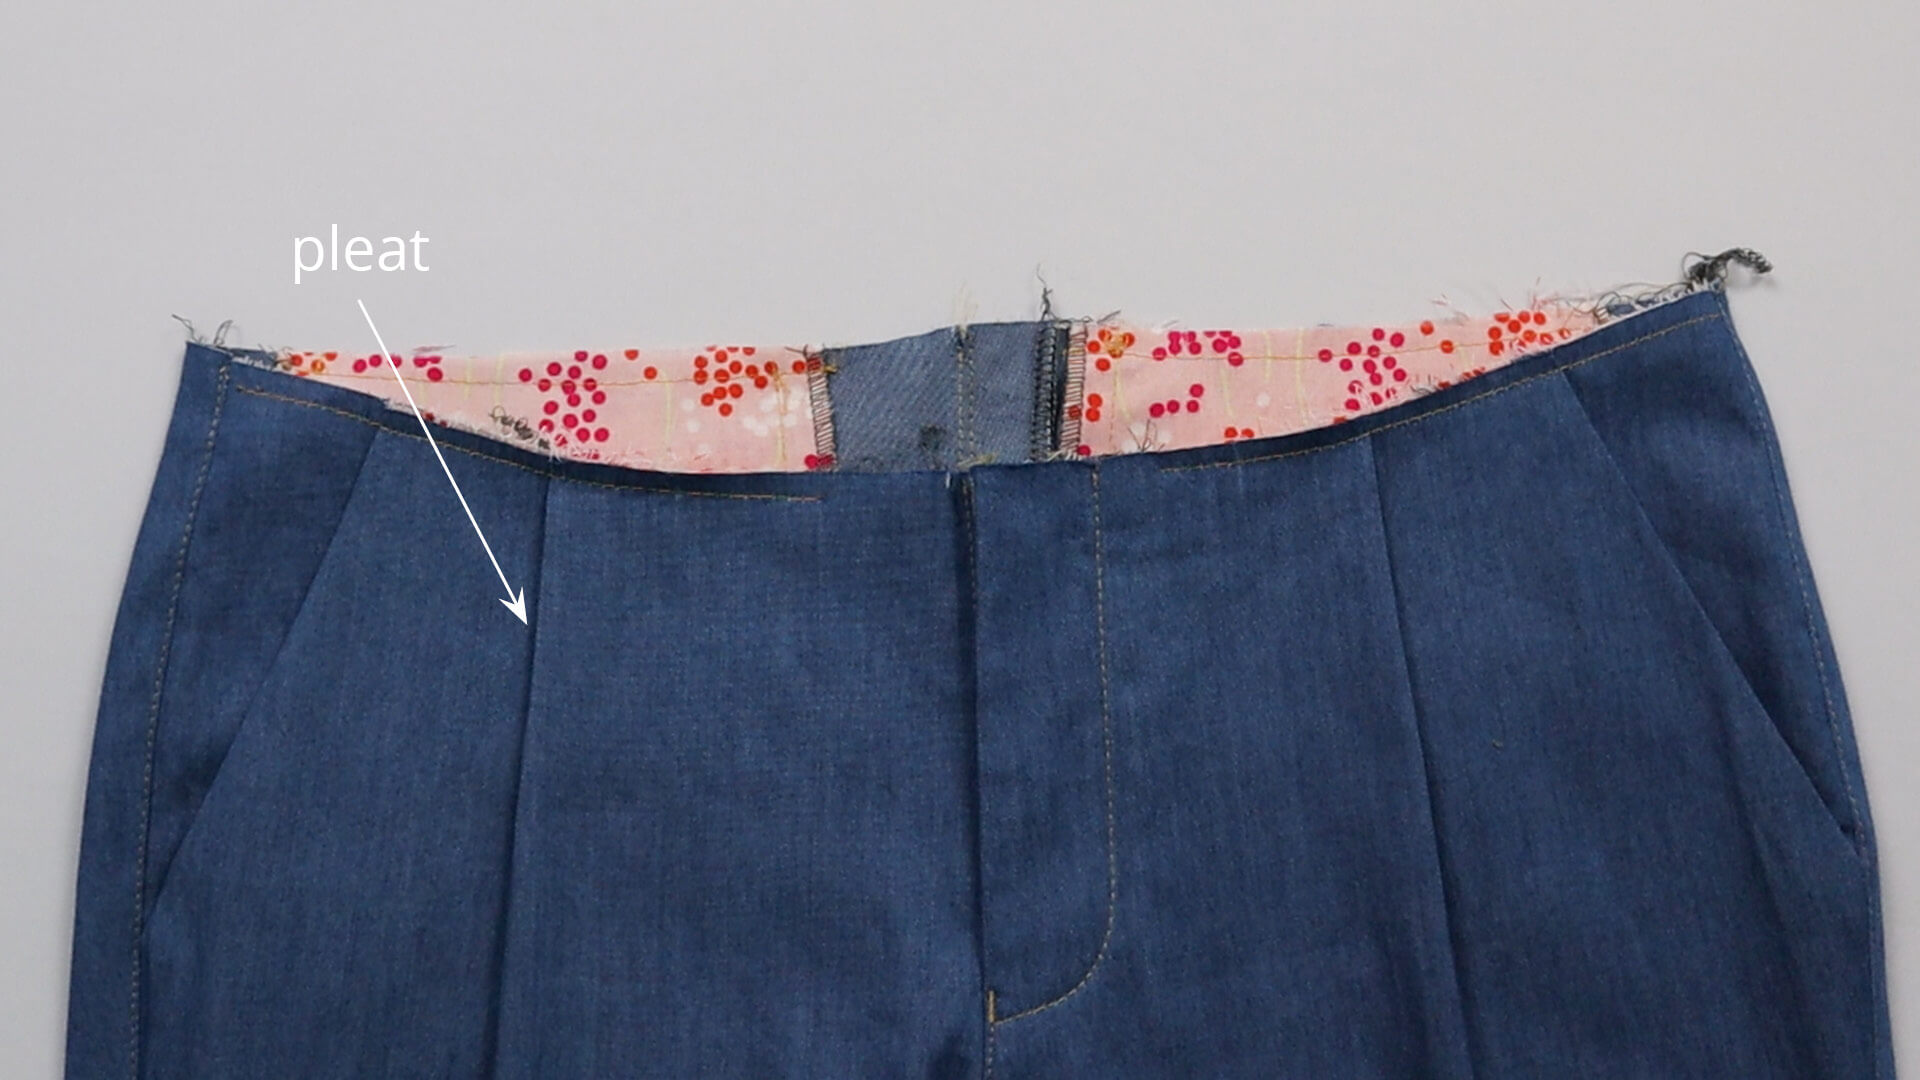 The picture shows how a pleat is folded and fastened before the waistband is sewn on.